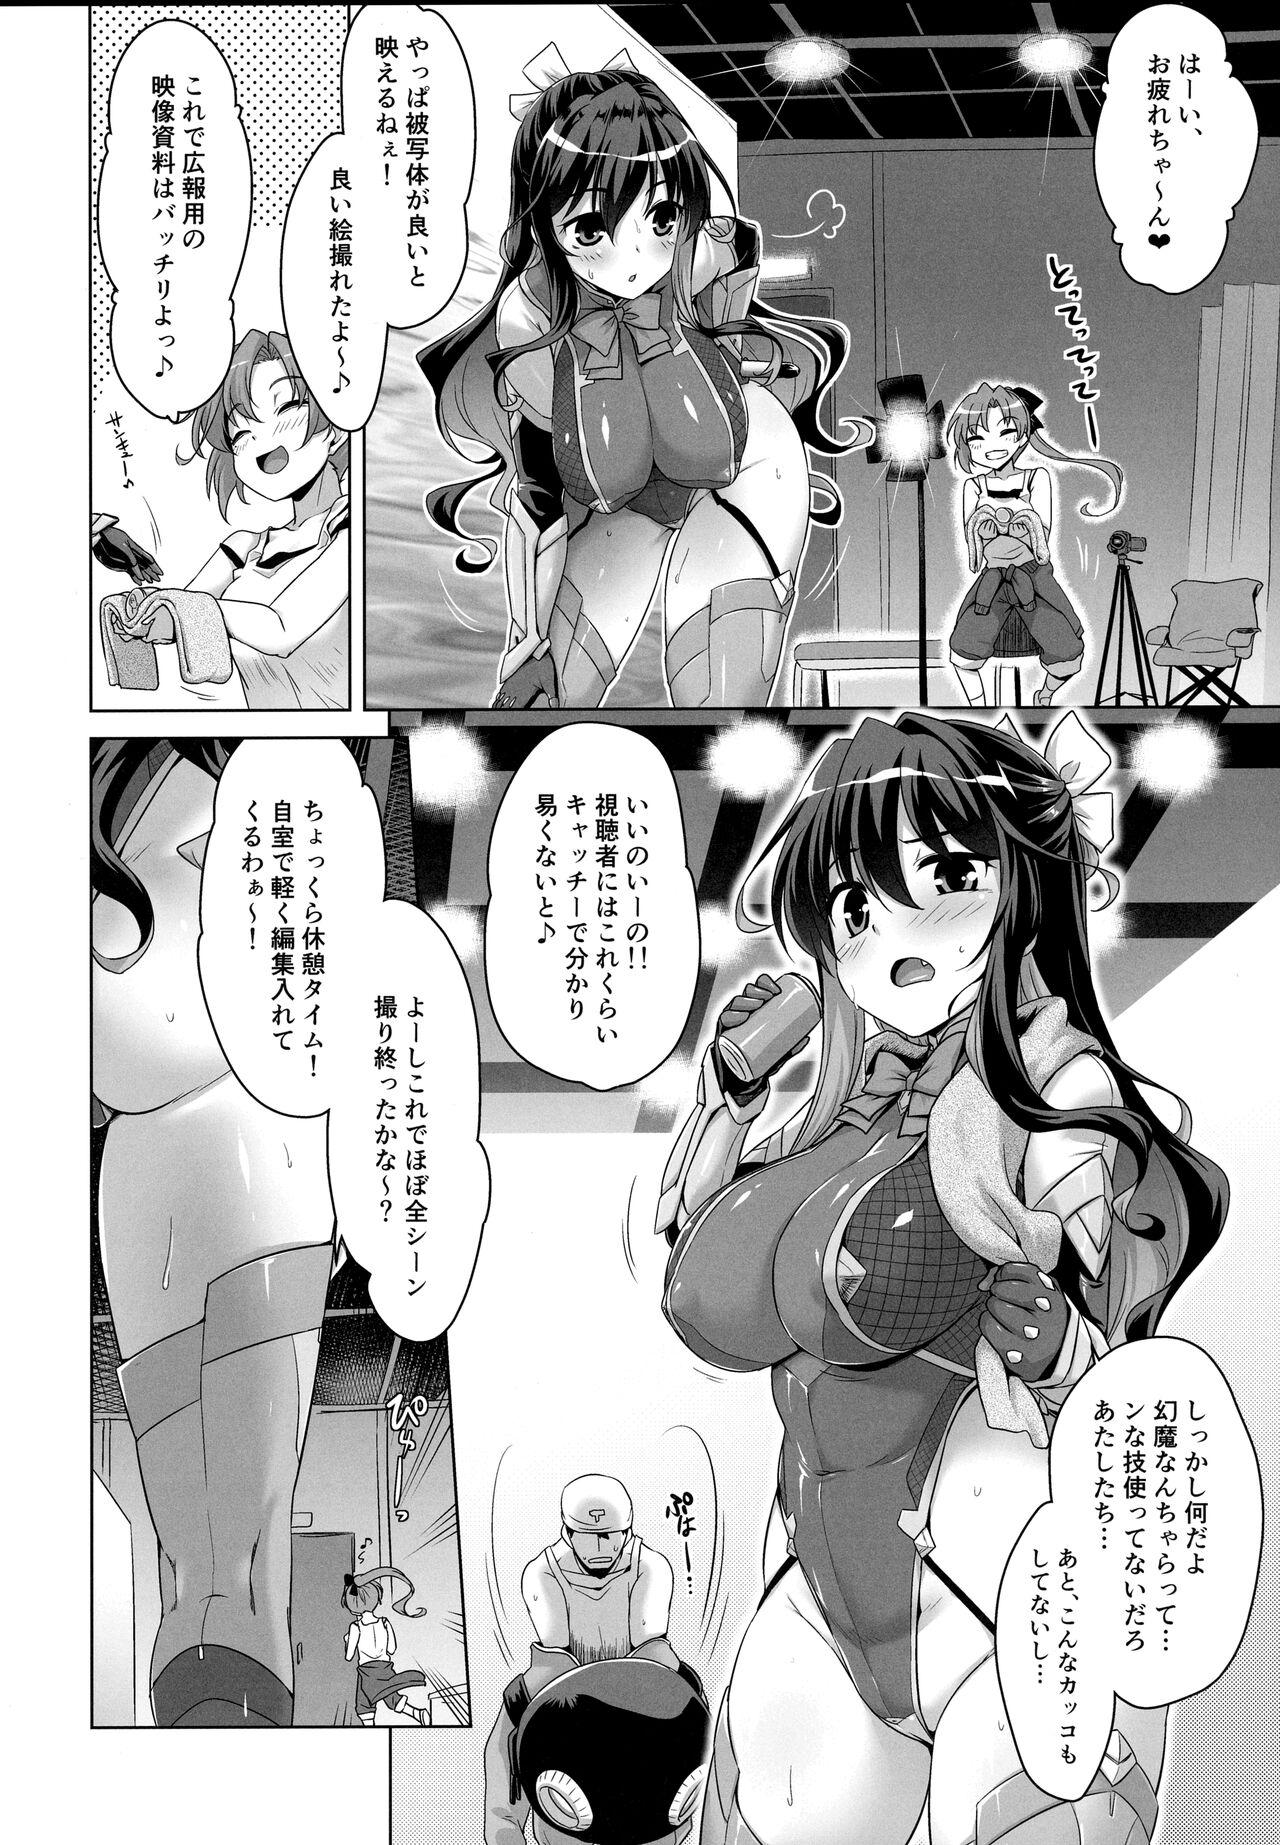 Mexicano みるきーDD～長波After shooting～ - Kantai collection Gemendo - Page 3